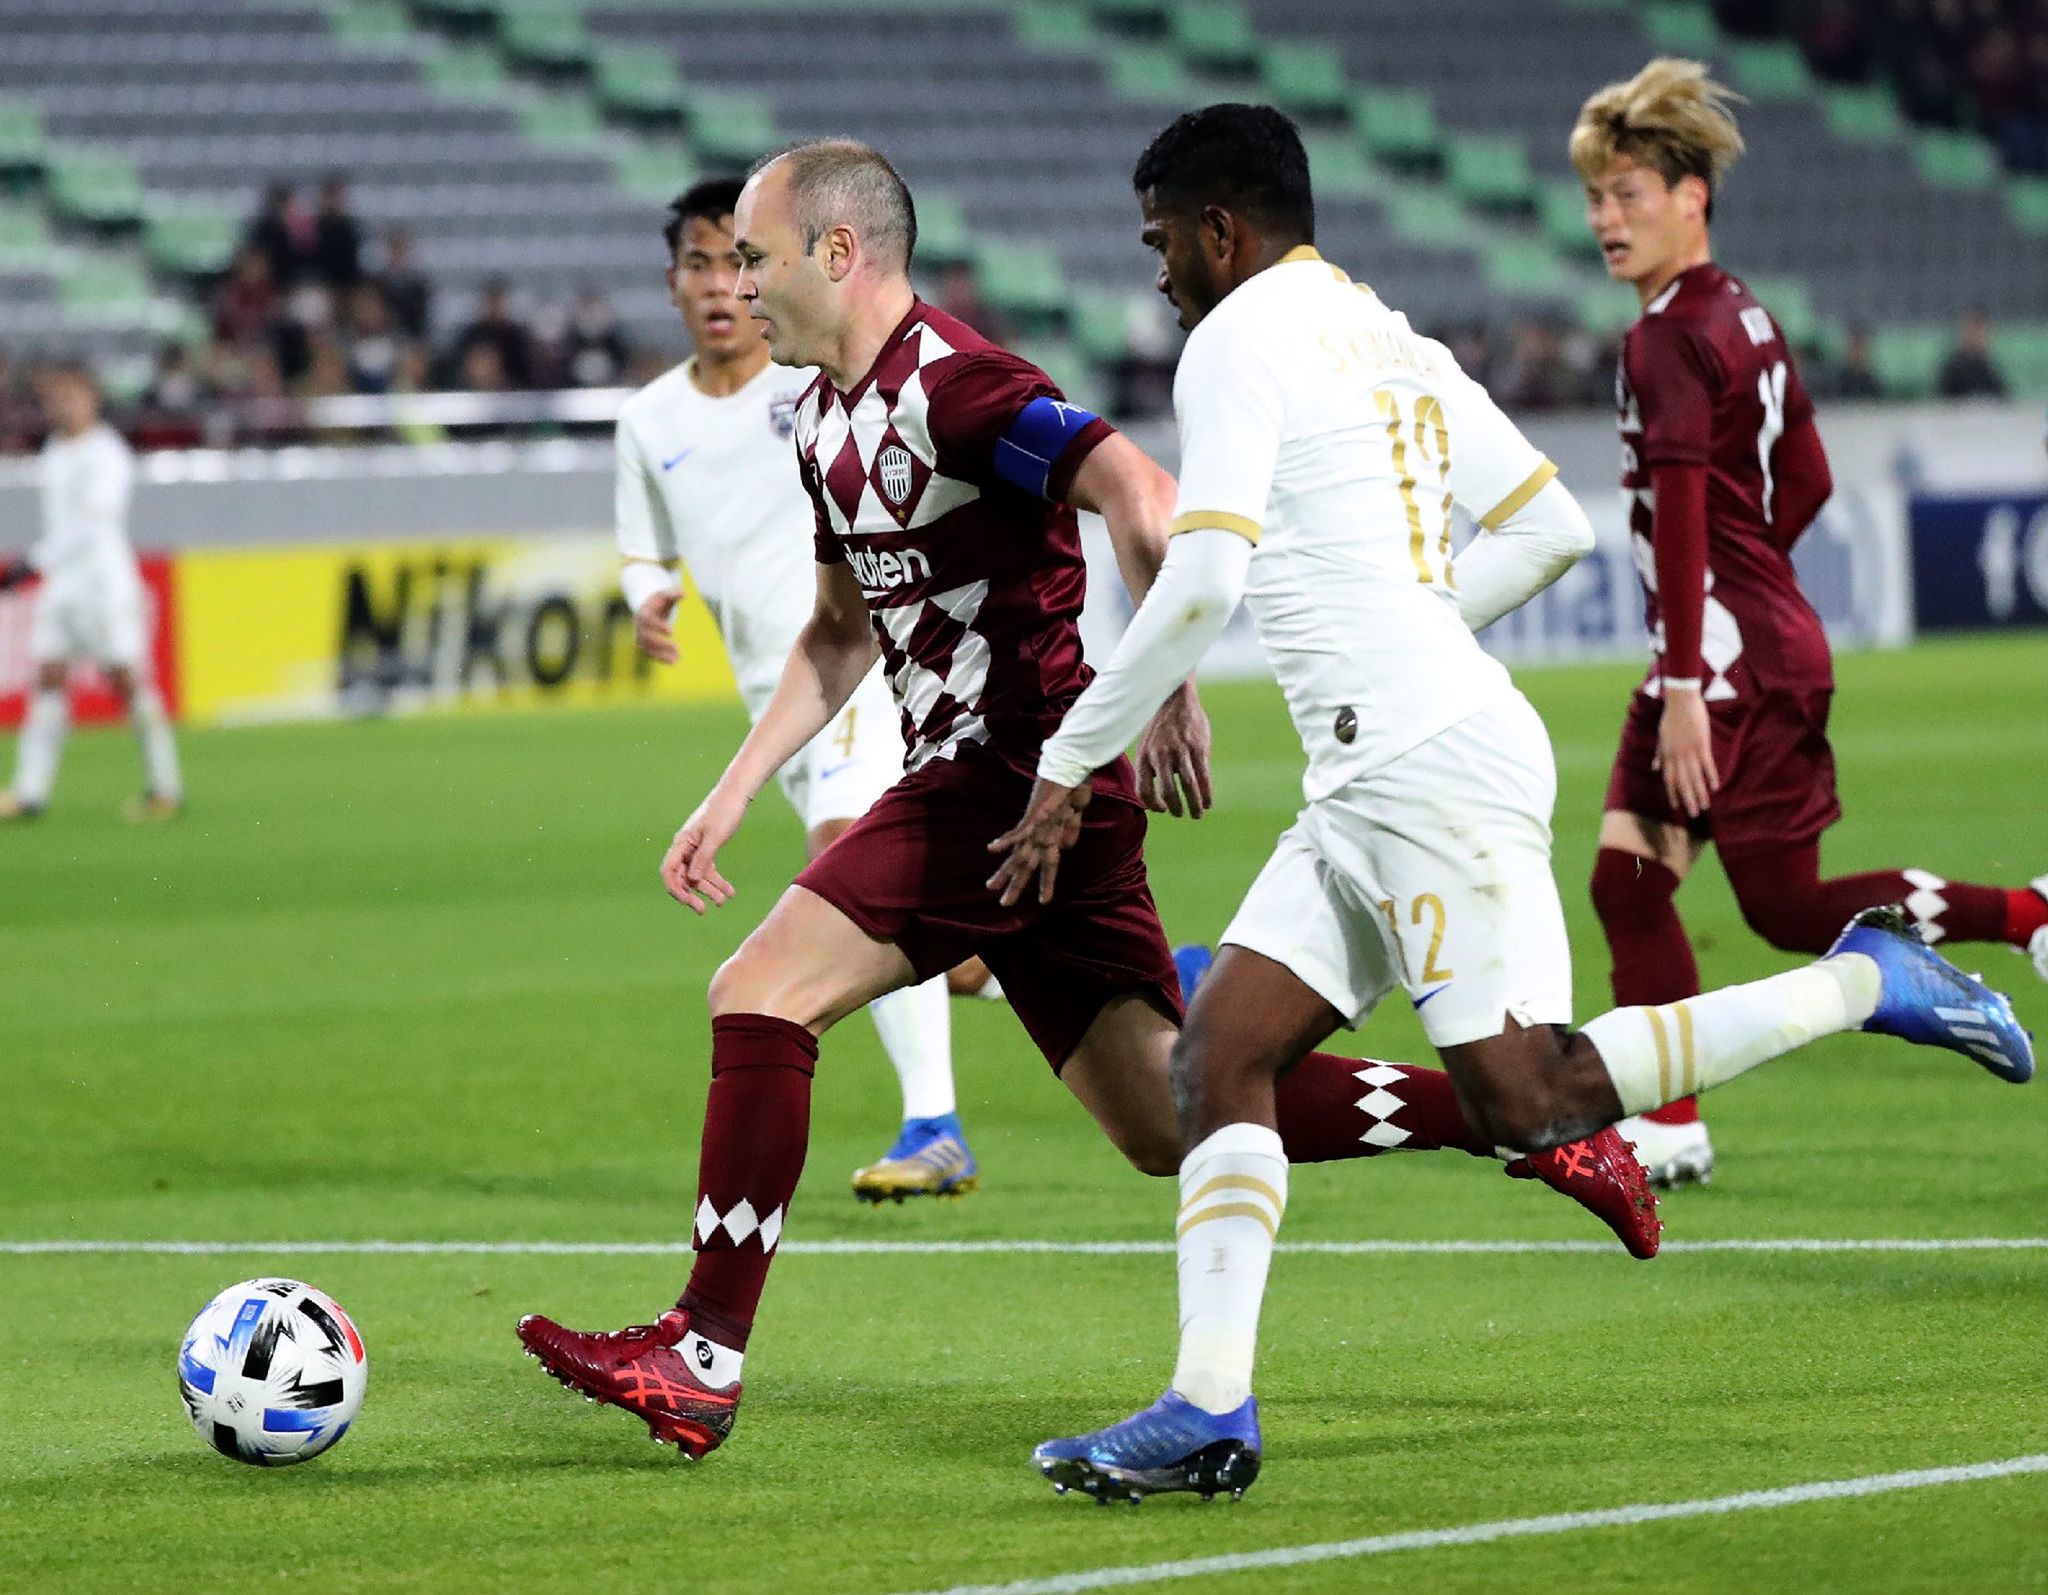 Vissel Kobe midfielders Andrs lt;HIT gt;Iniesta lt;/HIT gt; (L) fight for the ball with Johor Darul Tazim defender Kunanlan Subramaniam (2nd R) during the AFC Champions League group G football match between Japans Vissel Kobe and Malaysias Johor Darul Tazim at Misaki Park Stadium in Kobe, Hyogo prefecture on February 12, 2020. (Photo by STR / JIJI PRESS / AFP) / Japan OUT